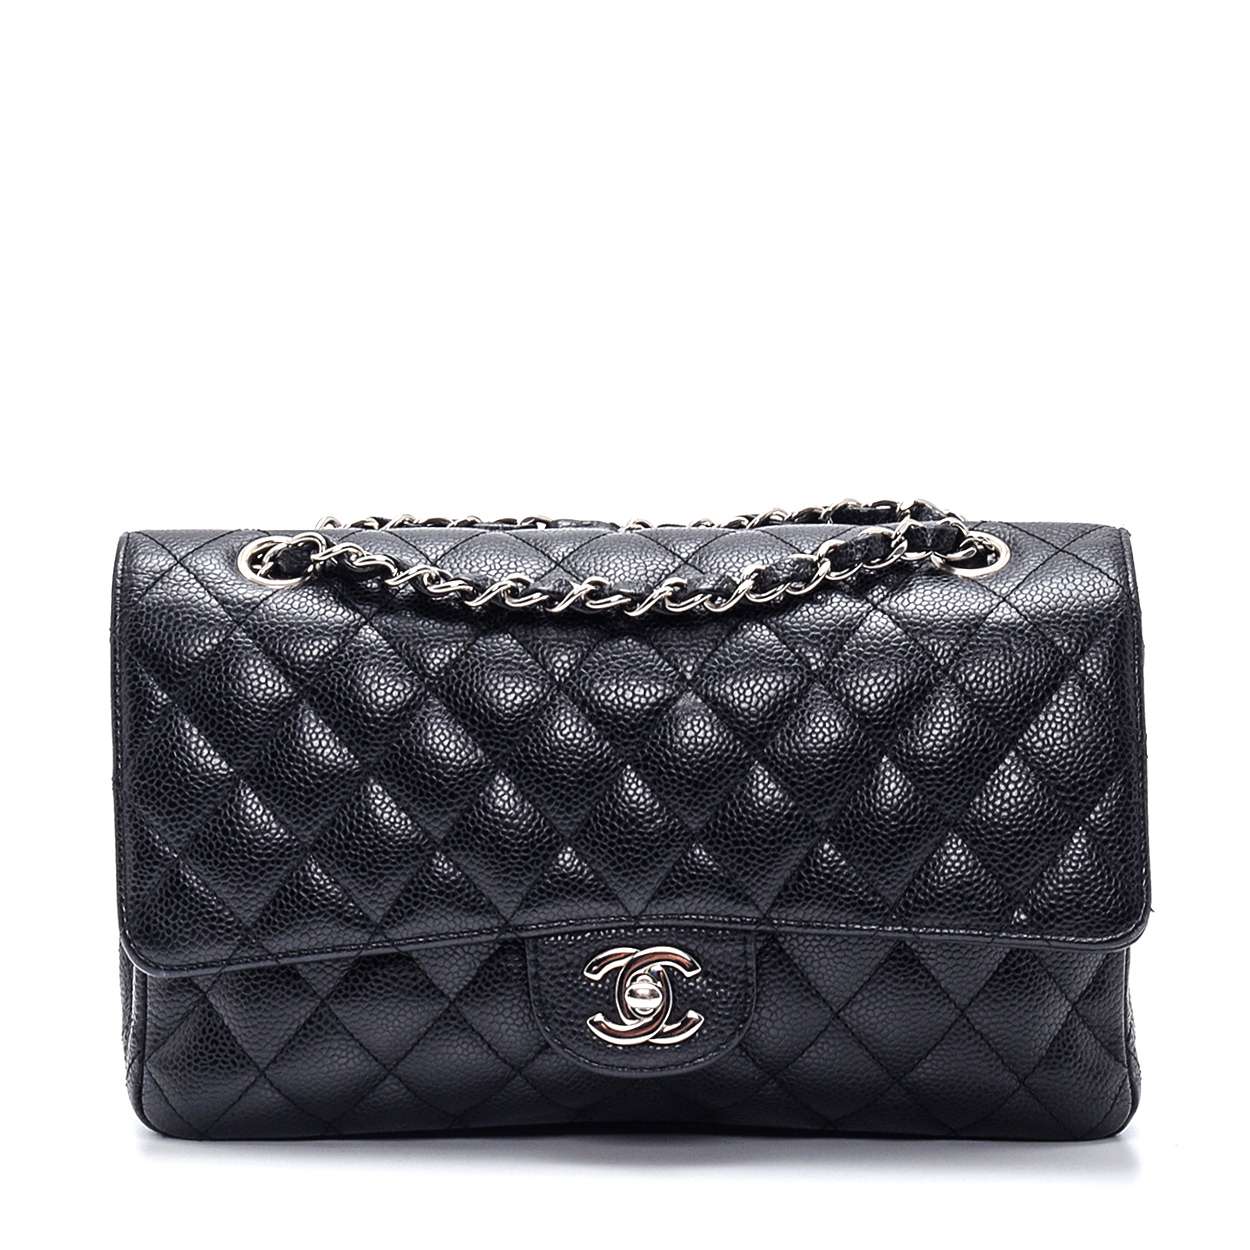 Chanel - Black Quilted Caviar Leather 2.55 Medium Double Flap Bag